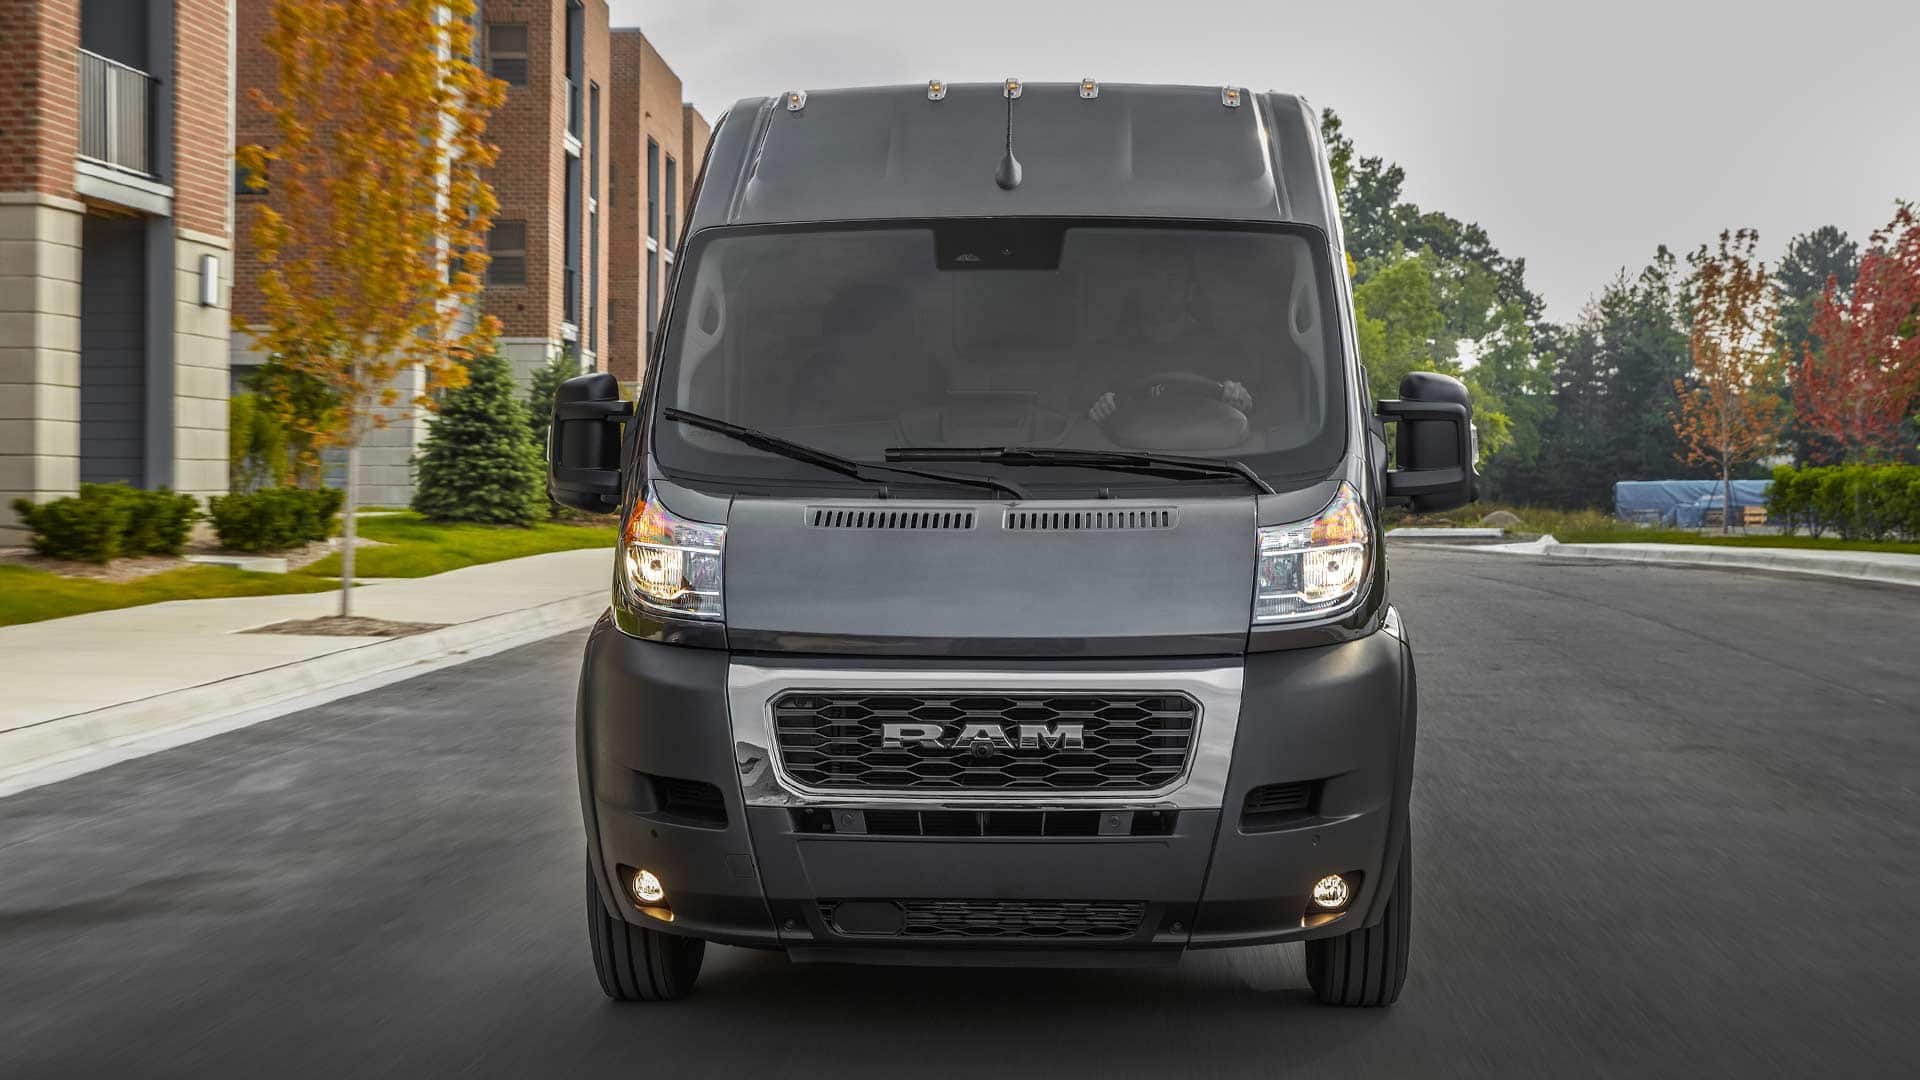 Display The 2022 Ram ProMaster being driven on a residential street.